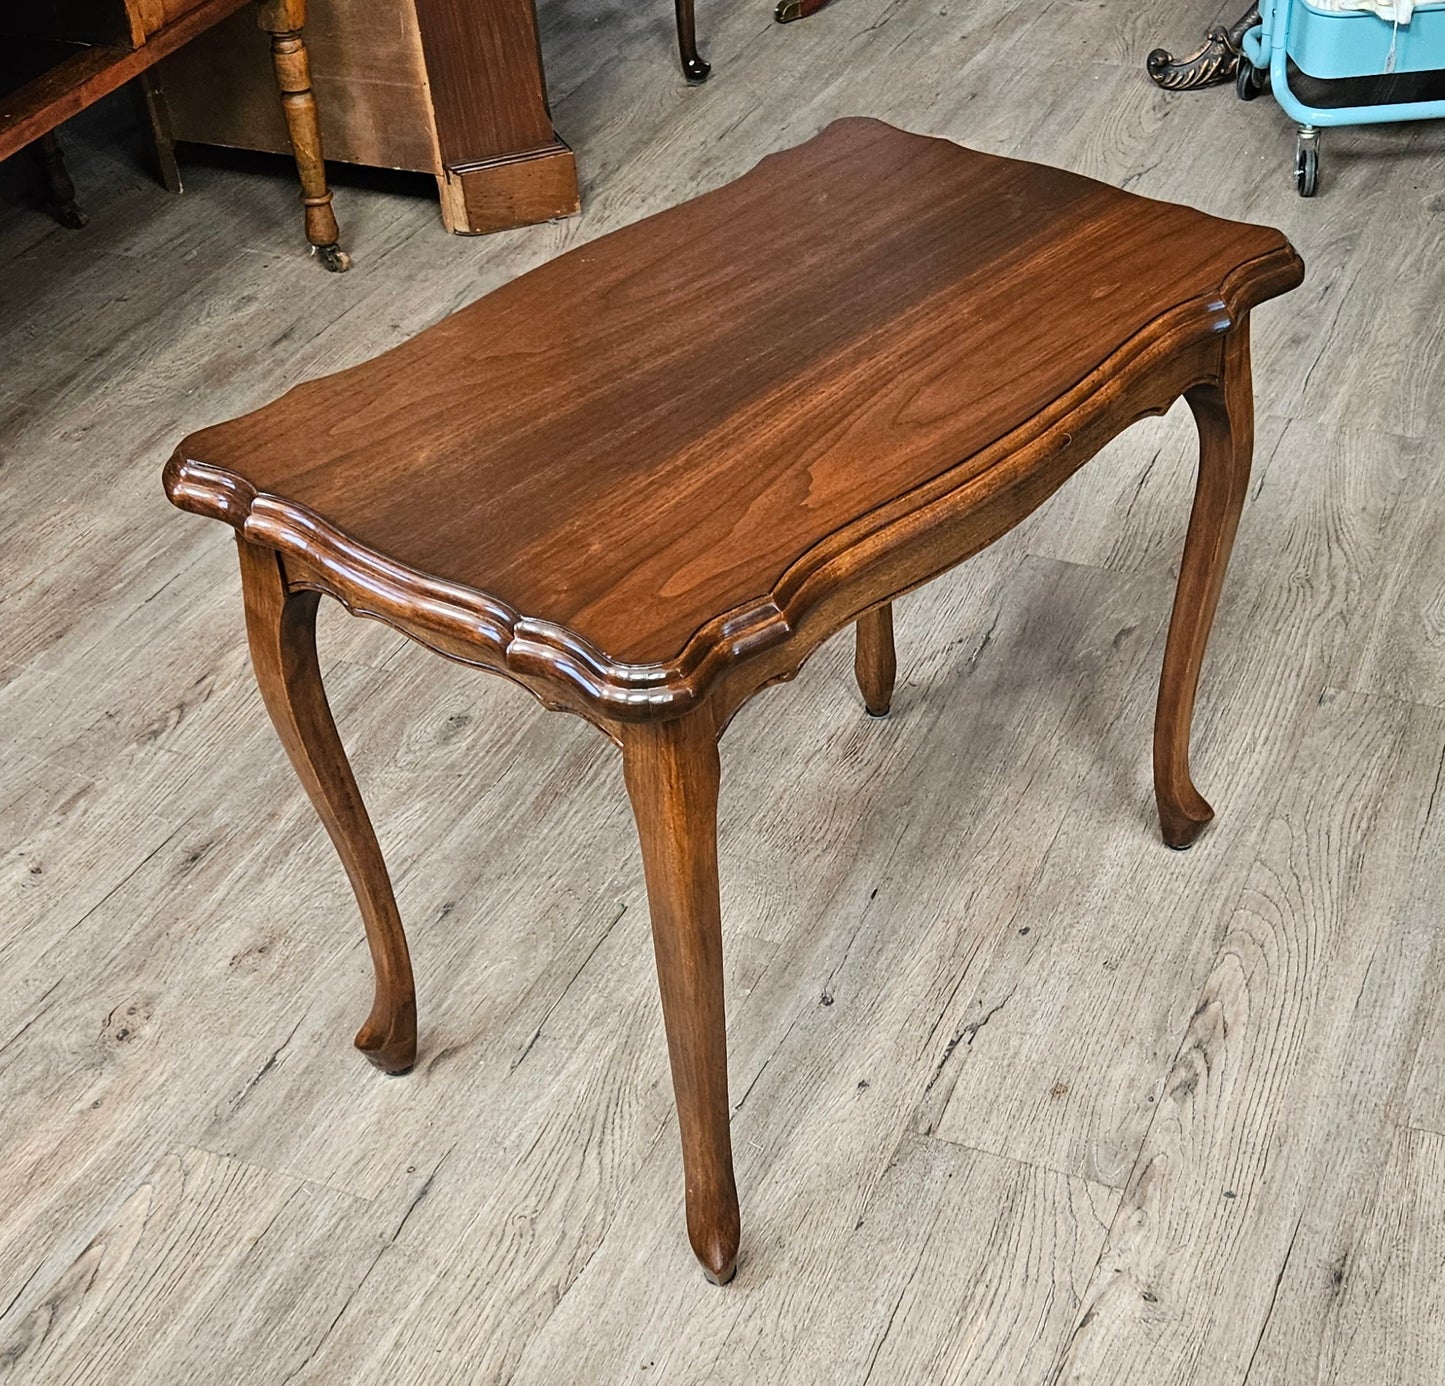 Rectangular coffee/side table, French Provincial style